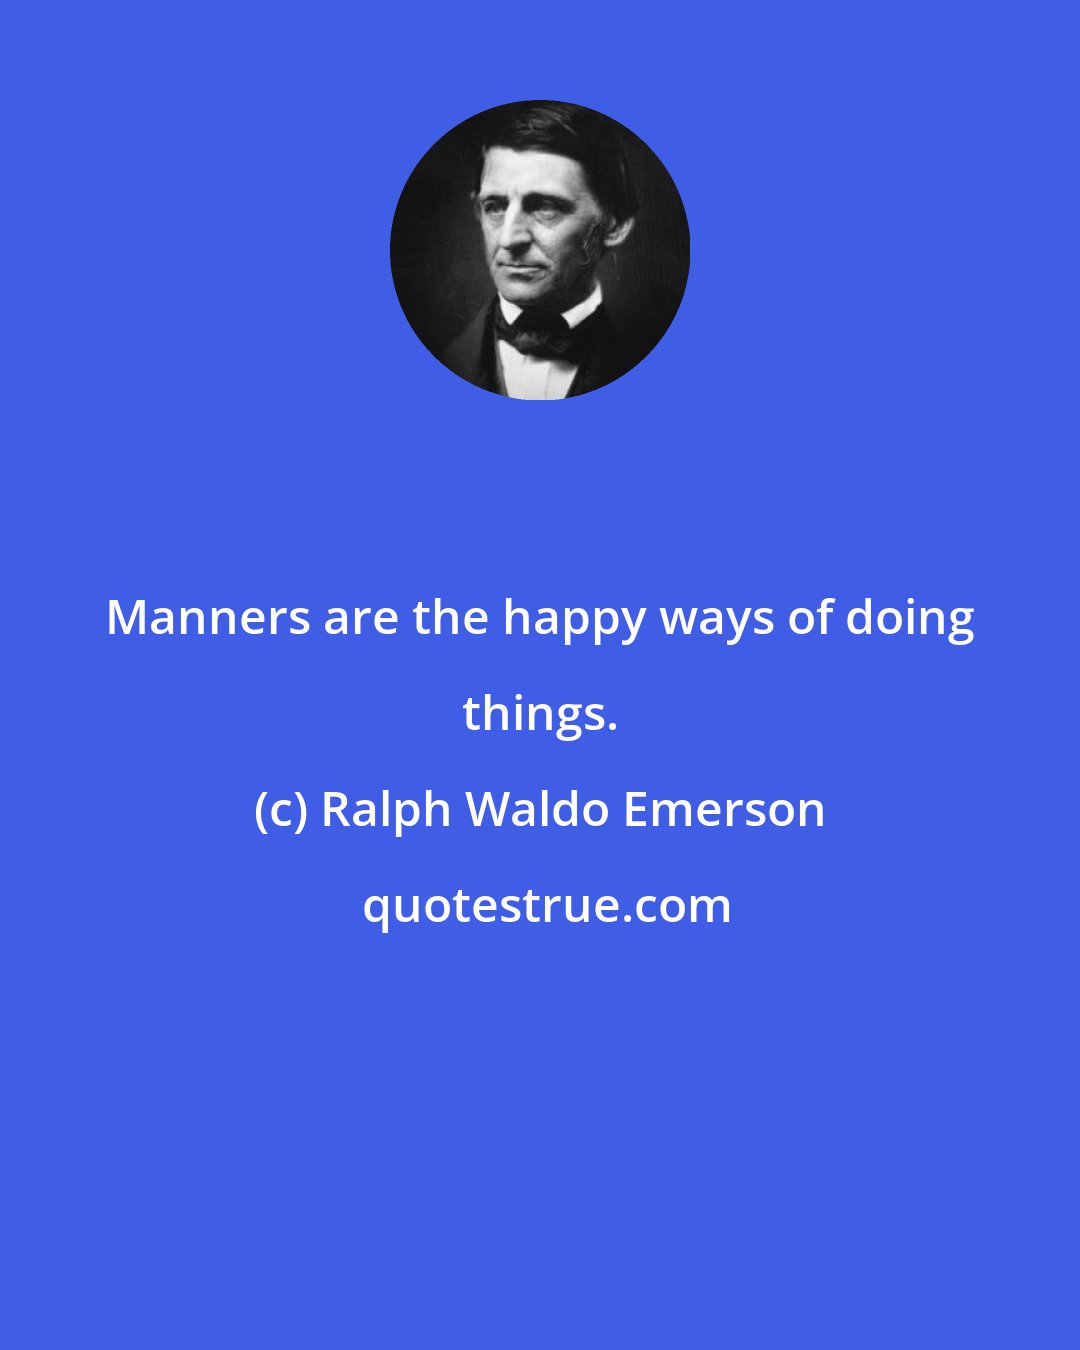 Ralph Waldo Emerson: Manners are the happy ways of doing things.